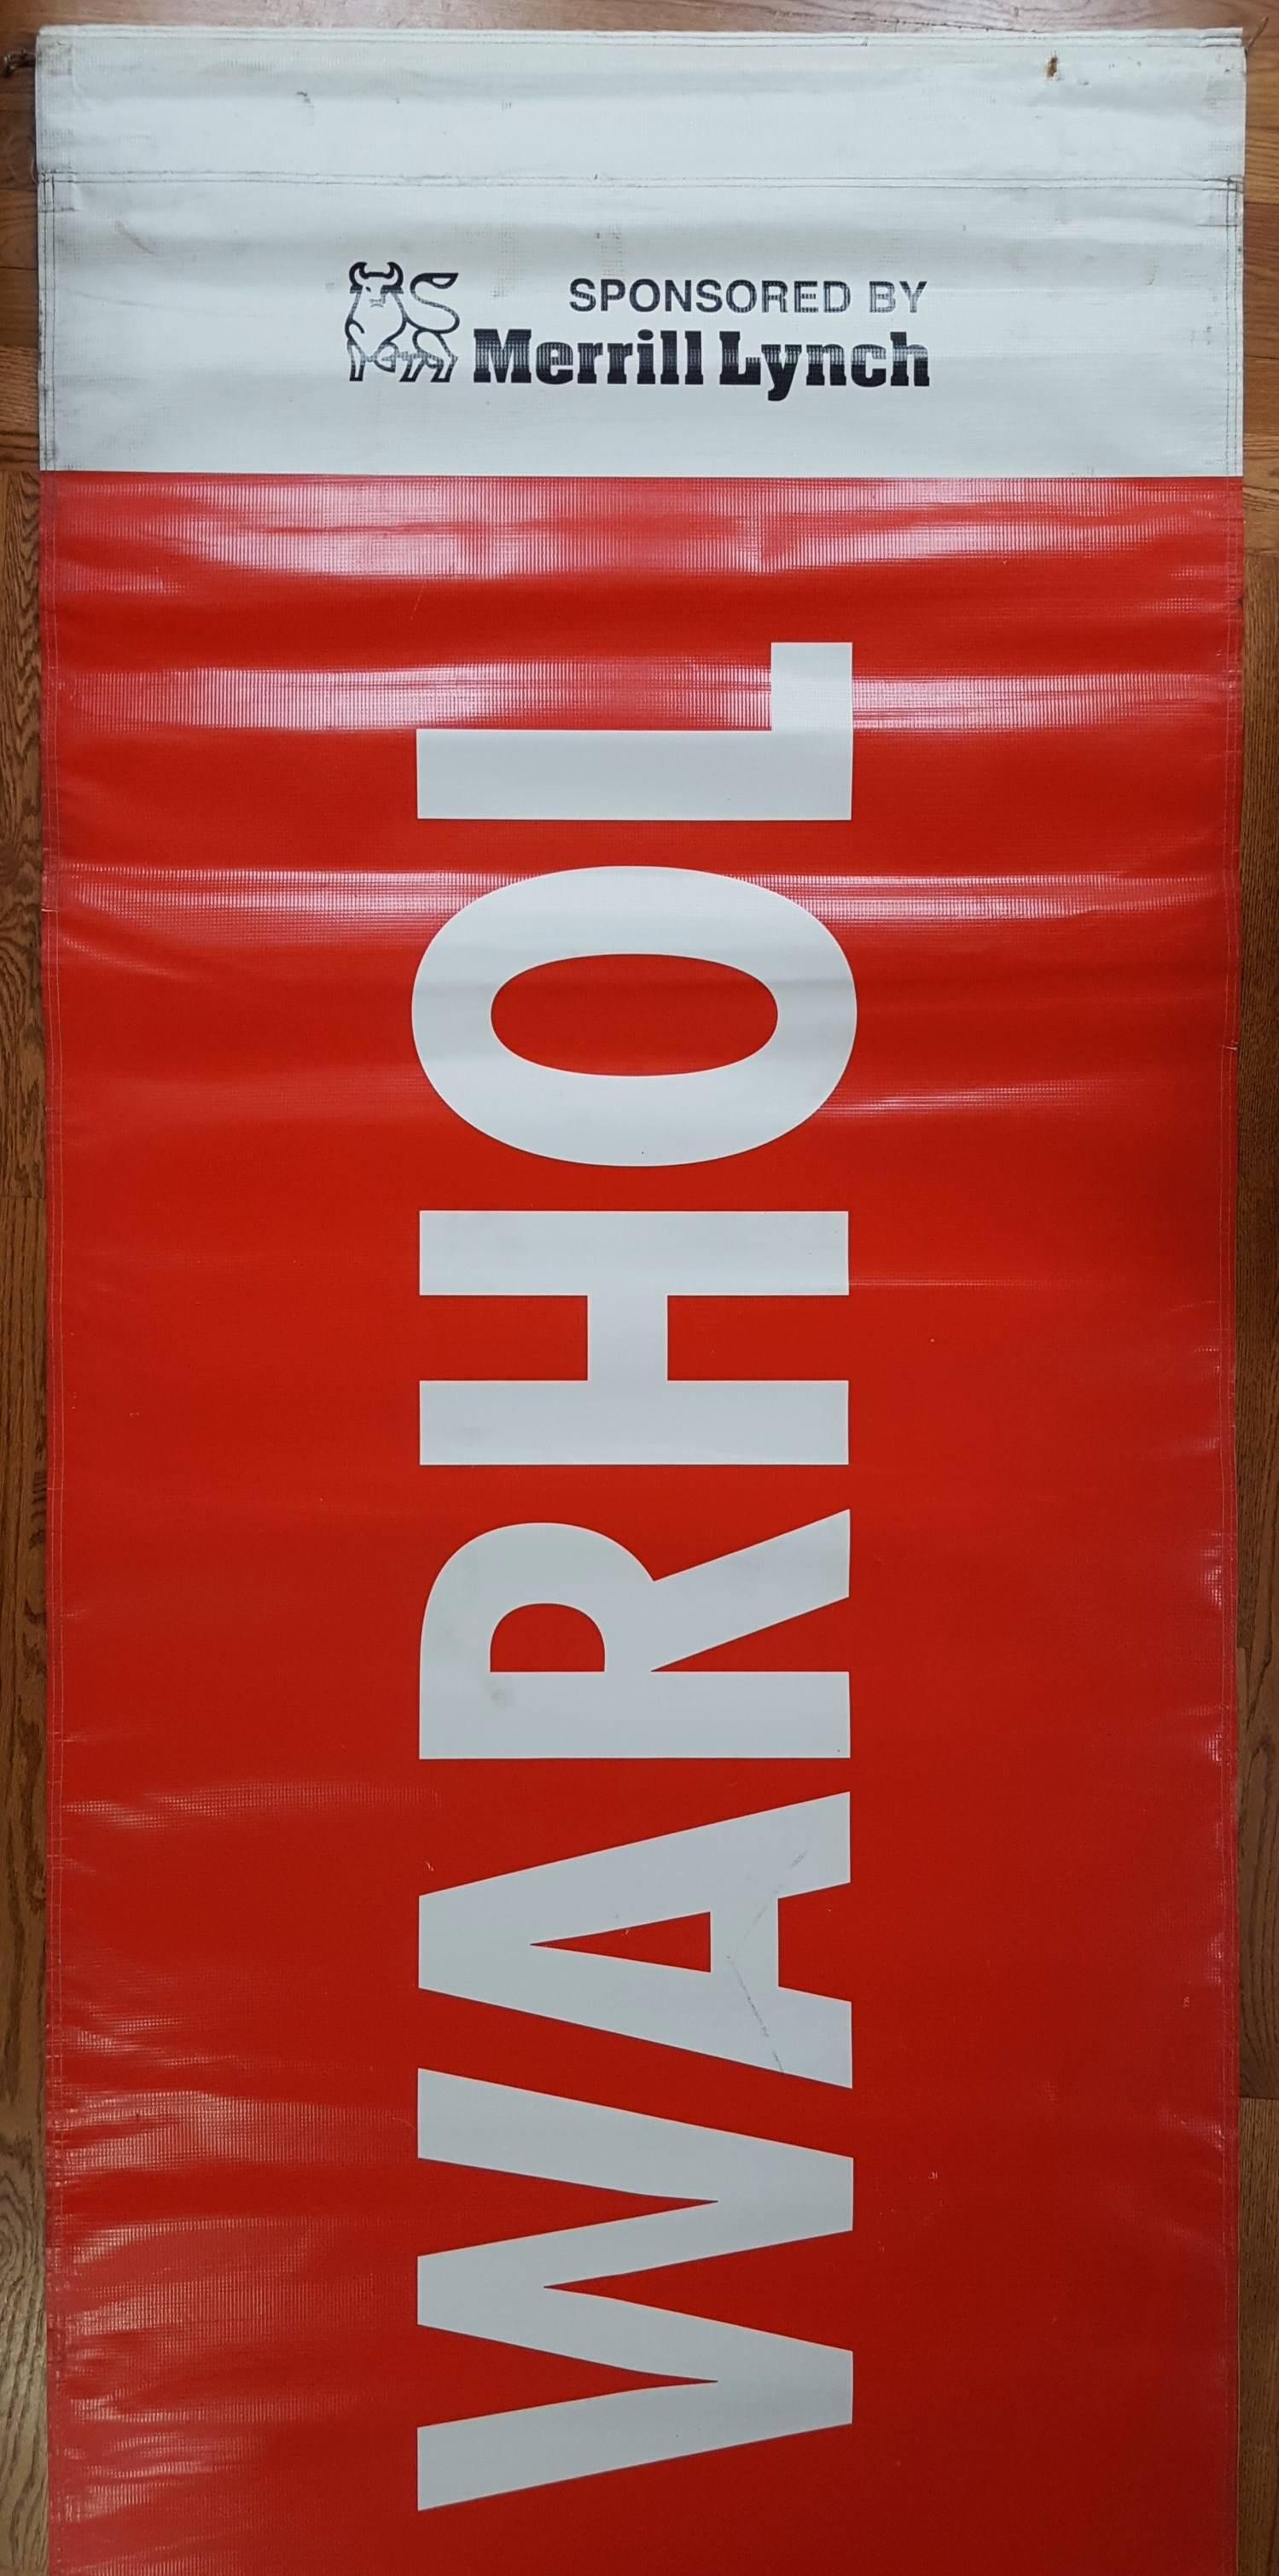 A huge double sided vinyl museum exhibition poster titled "Andy Warhol Retrospective at MOCA", 2002. The poster was produced for the special exhibit of Warhol's work at the Museum of Contemporary Art in Los Angeles, California. An Andy